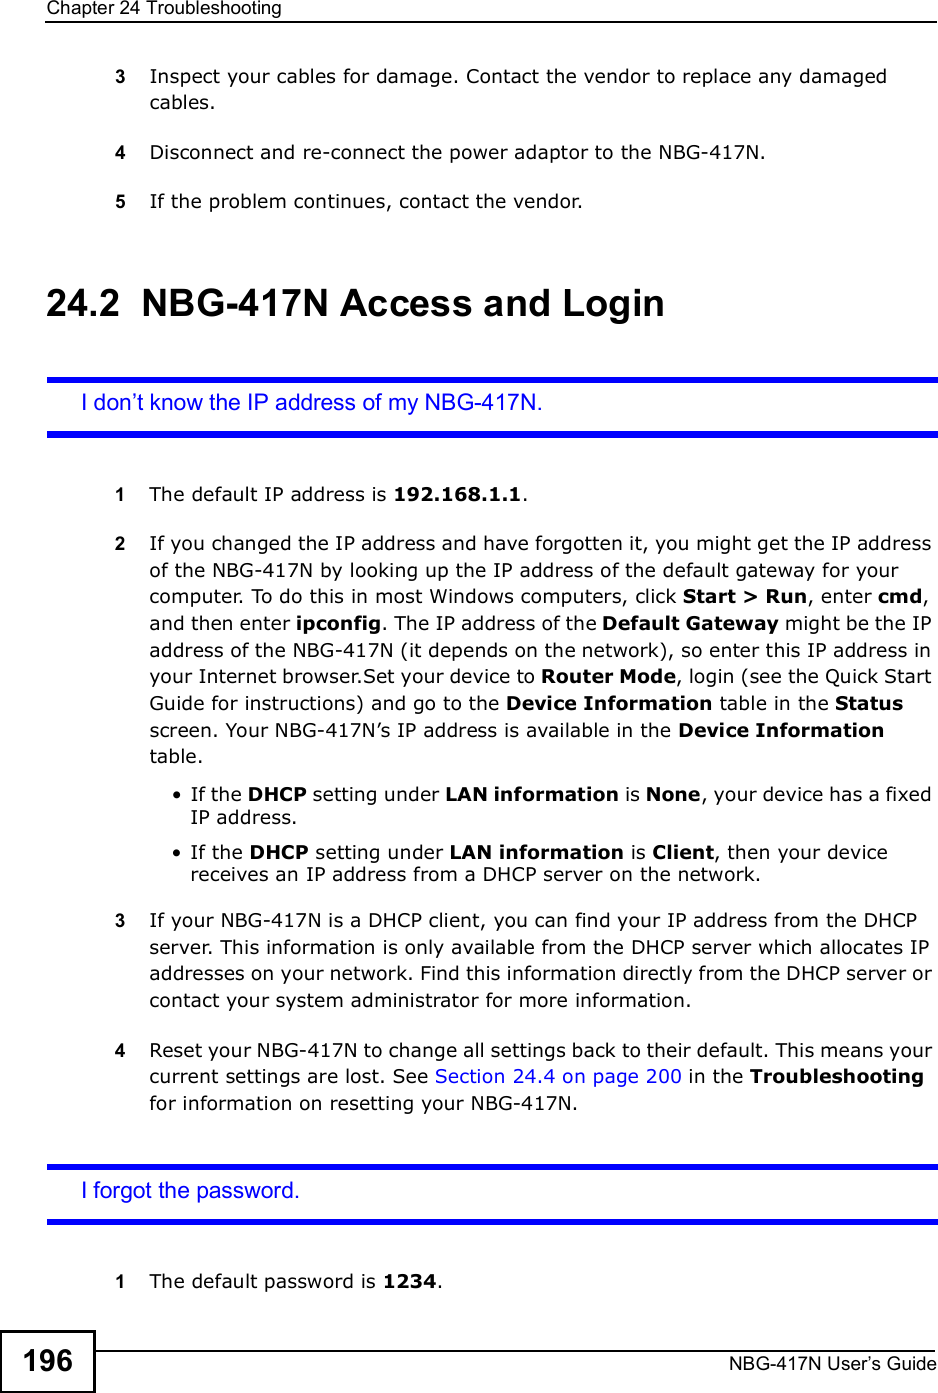 Chapter 24TroubleshootingNBG-417N User s Guide1963Inspect your cables for damage. Contact the vendor to replace any damaged cables.4Disconnect and re-connect the power adaptor to the NBG-417N. 5If the problem continues, contact the vendor.24.2  NBG-417N Access and LoginI don t know the IP address of my NBG-417N.1The default IP address is 192.168.1.1.2If you changed the IP address and have forgotten it, you might get the IP address of the NBG-417N by looking up the IP address of the default gateway for your computer. To do this in most Windows computers, click Start &gt; Run, enter cmd, and then enter ipconfig. The IP address of the Default Gateway might be the IP address of the NBG-417N (it depends on the network), so enter this IP address in your Internet browser.Set your device to Router Mode, login (see the Quick Start Guide for instructions) and go to the Device Information table in the Status screen. Your NBG-417N!s IP address is available in the Device Information table.  If the DHCP setting under LAN information is None, your device has a fixed IP address.  If the DHCP setting under LAN information is Client, then your device receives an IP address from a DHCP server on the network. 3If your NBG-417N is a DHCP client, you can find your IP address from the DHCP server. This information is only available from the DHCP server which allocates IP addresses on your network. Find this information directly from the DHCP server or contact your system administrator for more information.4Reset your NBG-417N to change all settings back to their default. This means your current settings are lost. See Section 24.4 on page 200 in the Troubleshooting for information on resetting your NBG-417N. I forgot the password.1The default password is 1234.